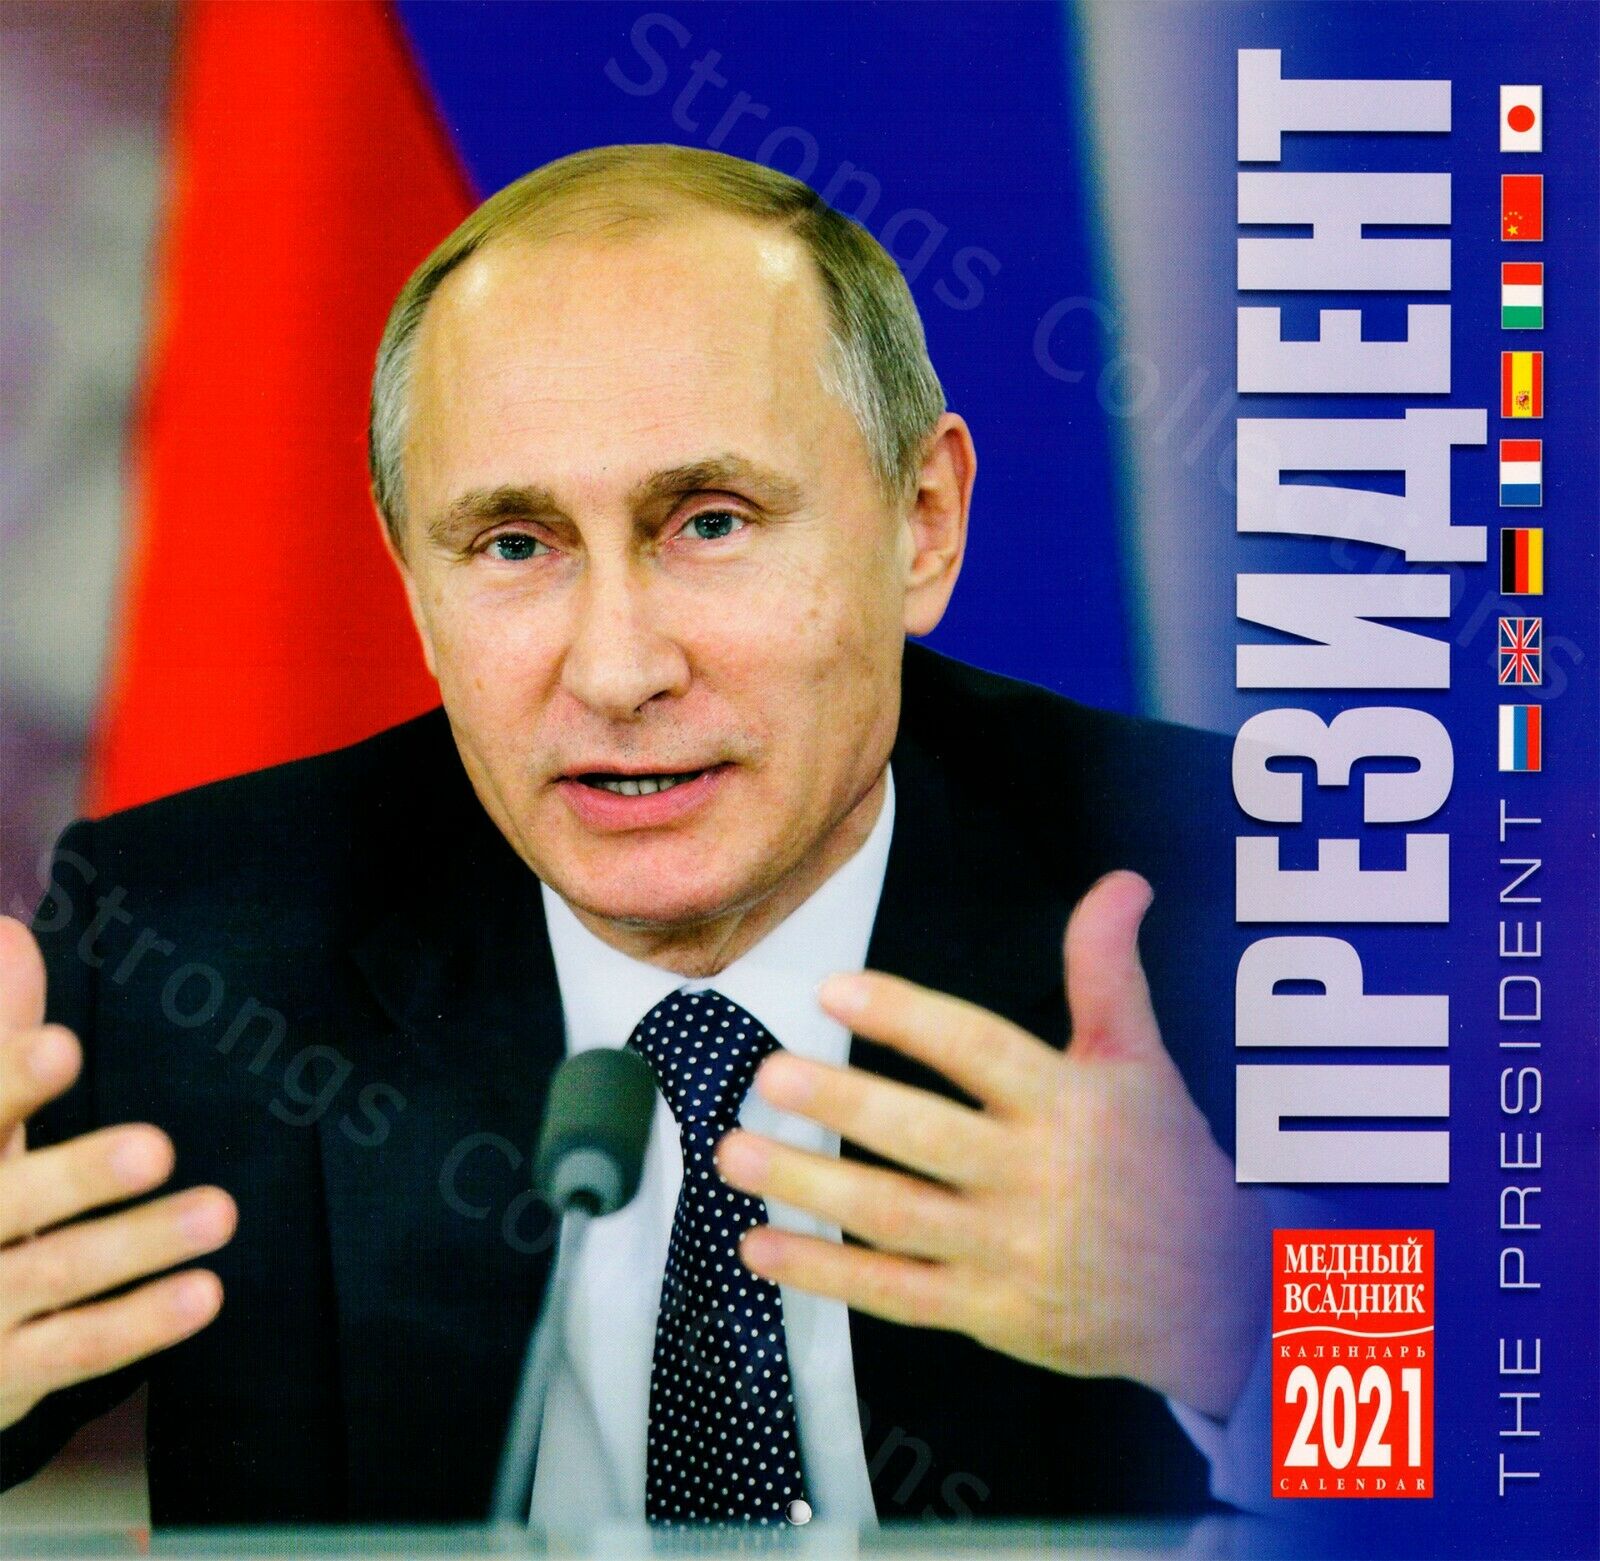 CALENDRIER VLADIMIR POUTINE 2021 THE PRESIDENT - RUSSIAFR